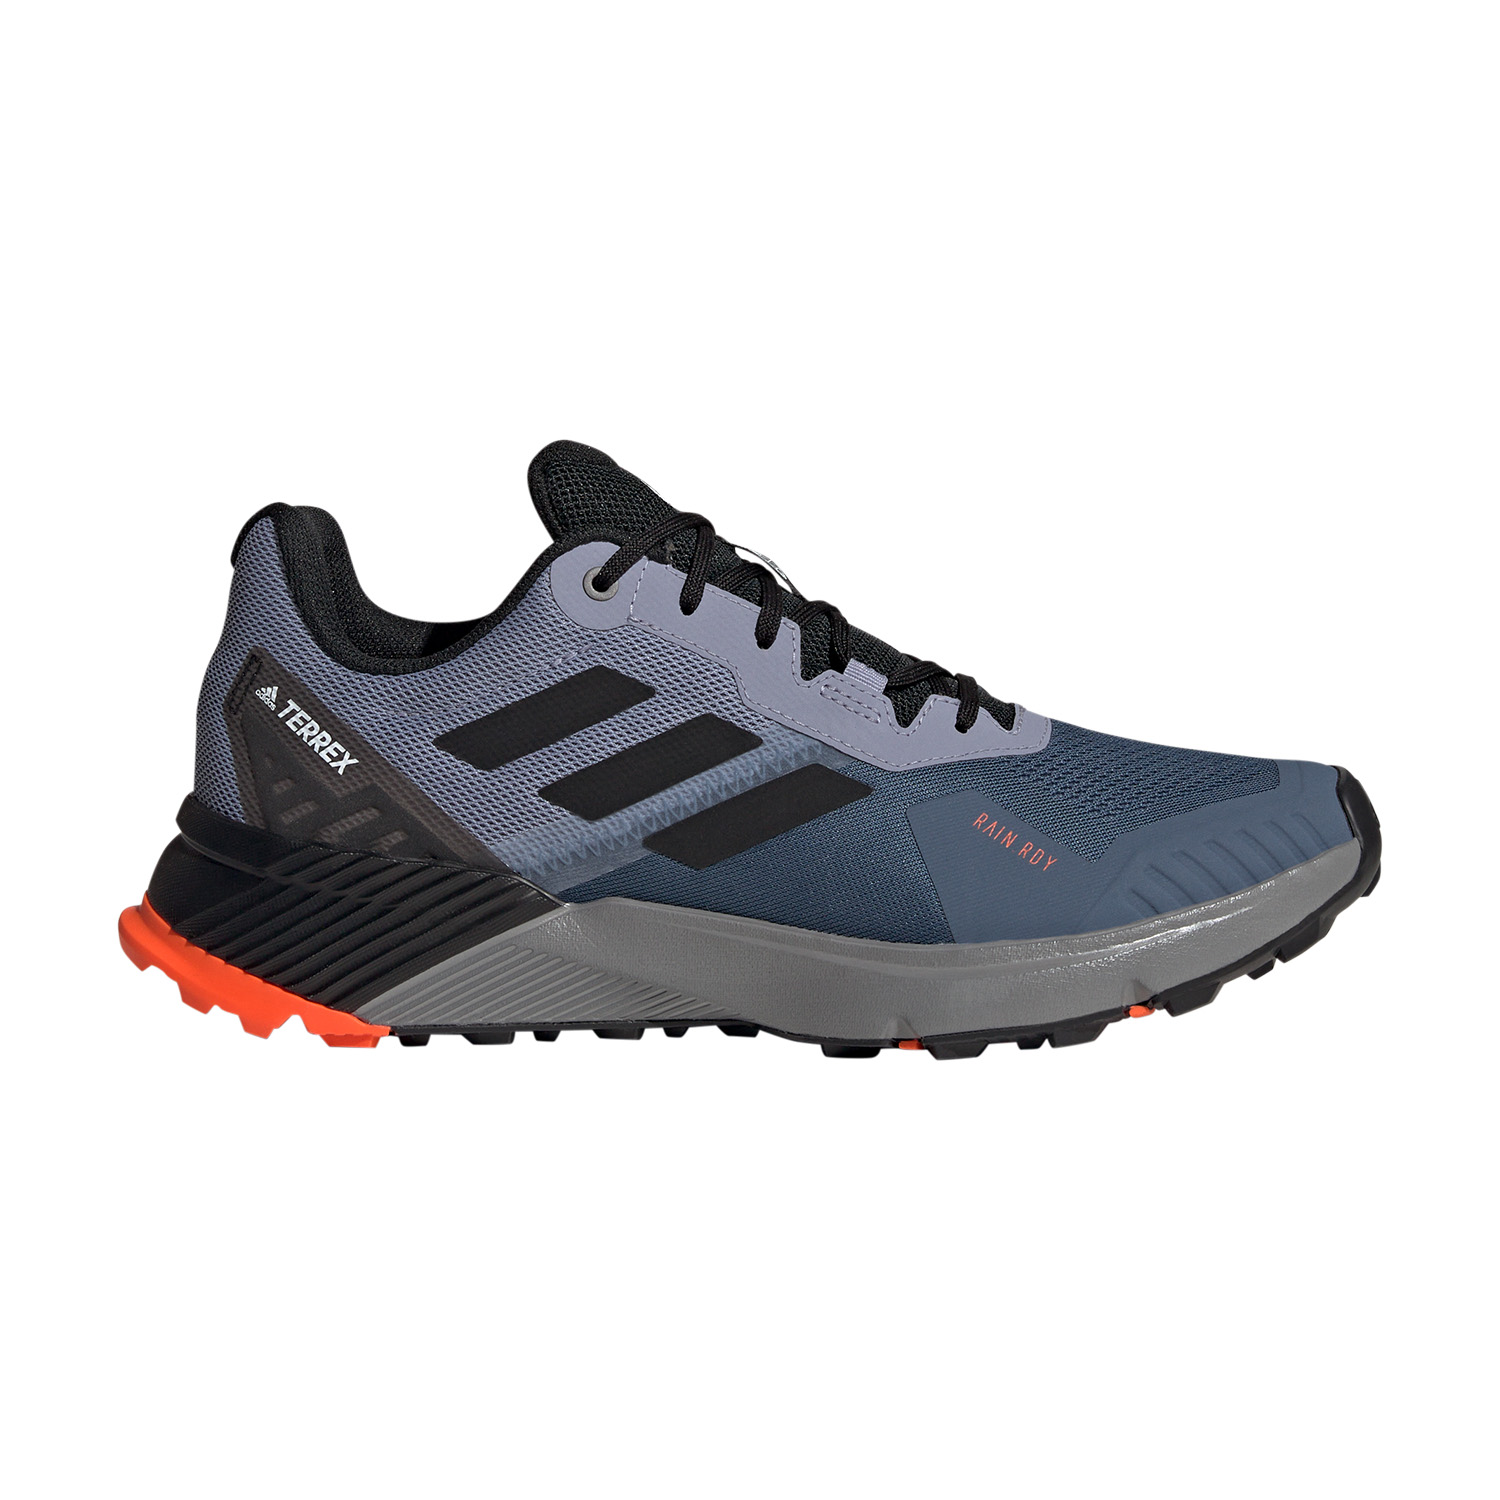 rifle Mention Queen adidas Terrex Soulstride R.RDY Men's Trail Running Shoes - Steel